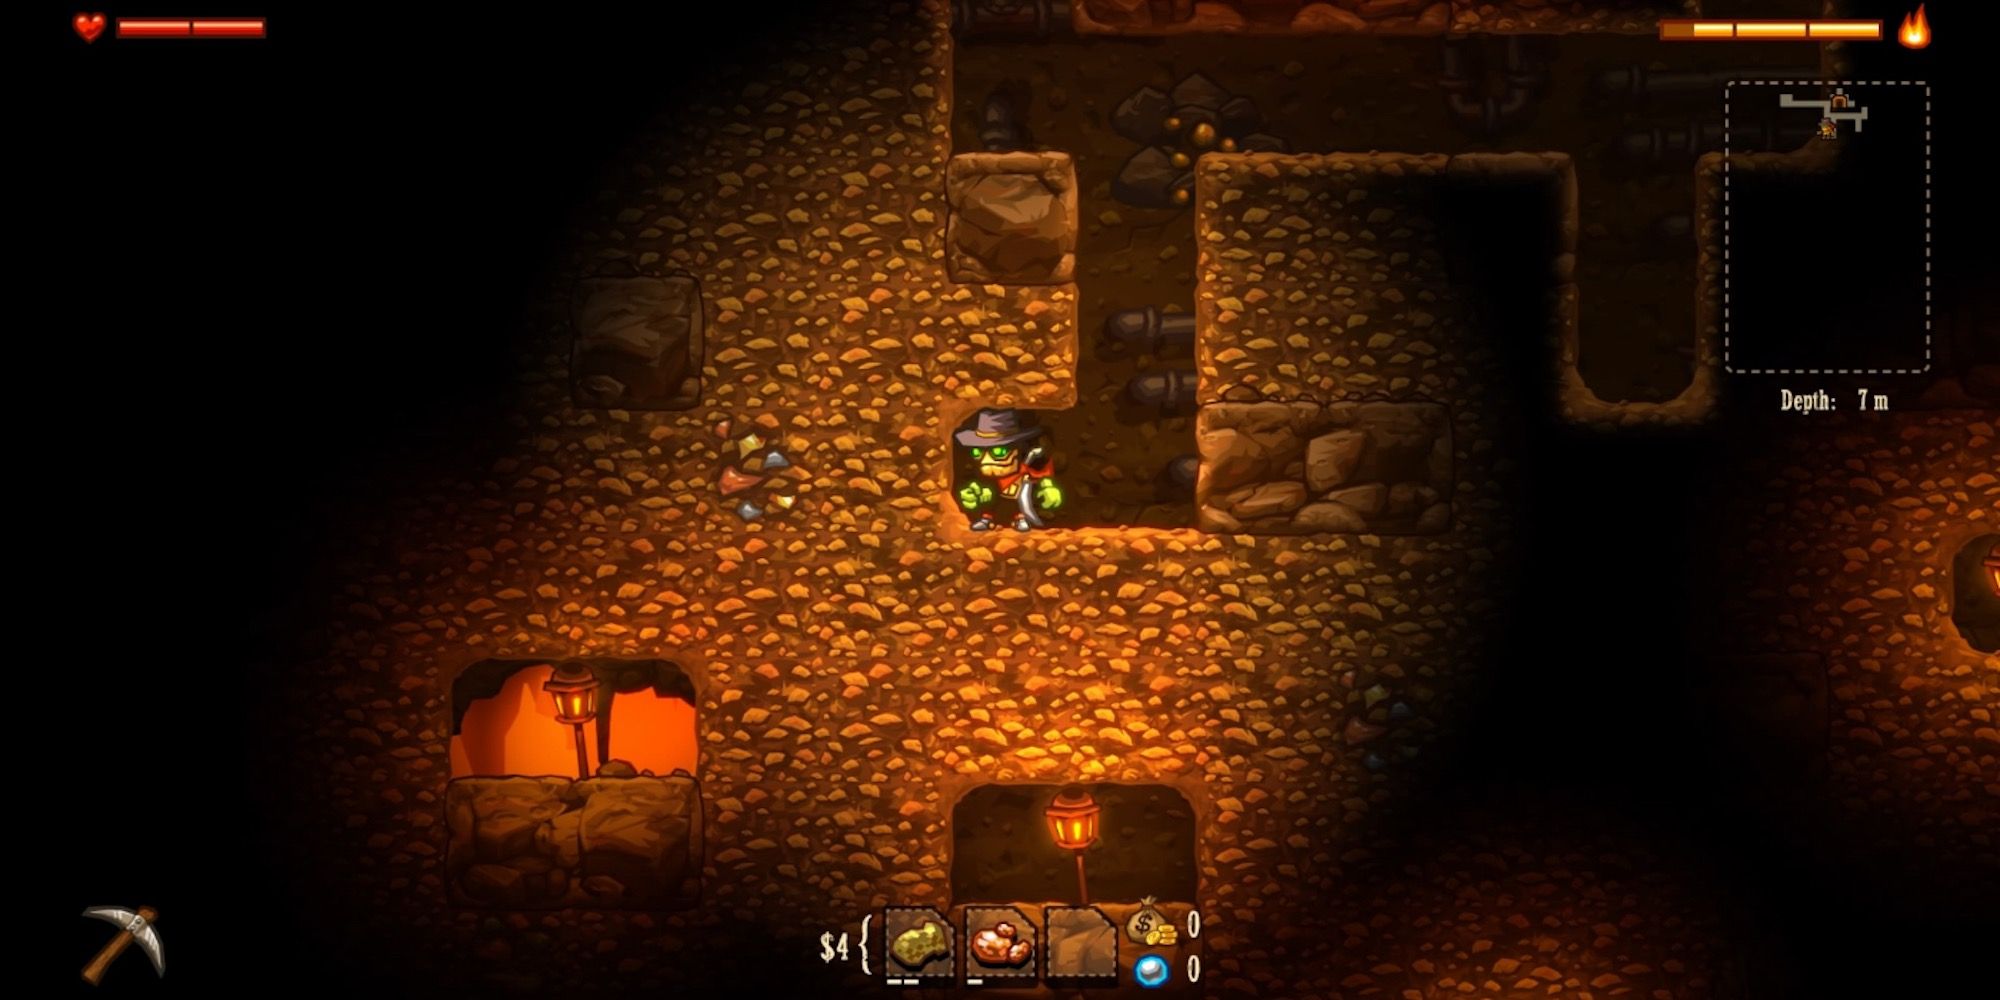 Exploring the world in SteamWorld Dig